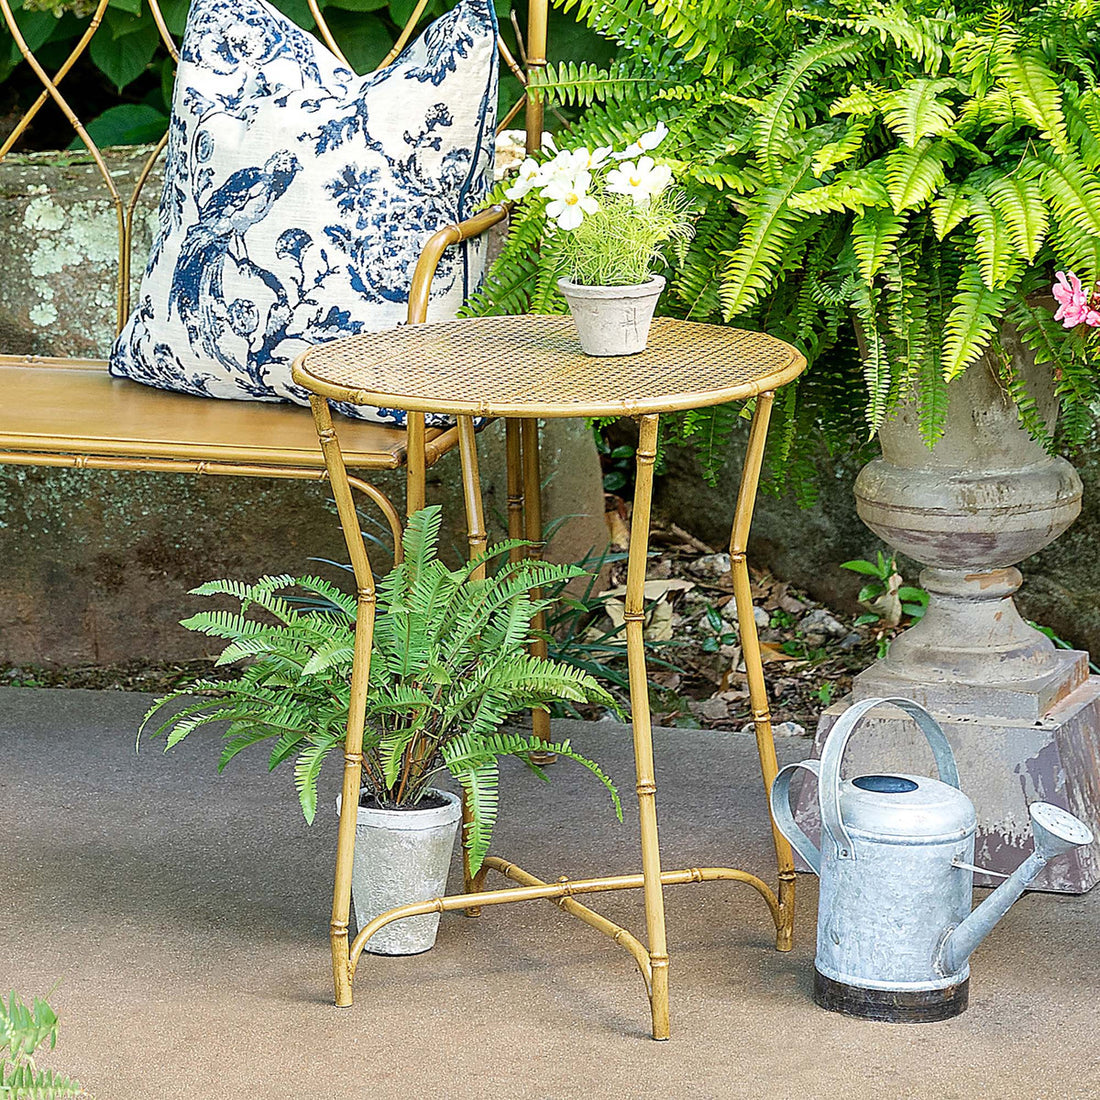 A cozy outdoor sitting area with Park Hill metal bamboo side pieces, a round table, potted plants, and a watering can.